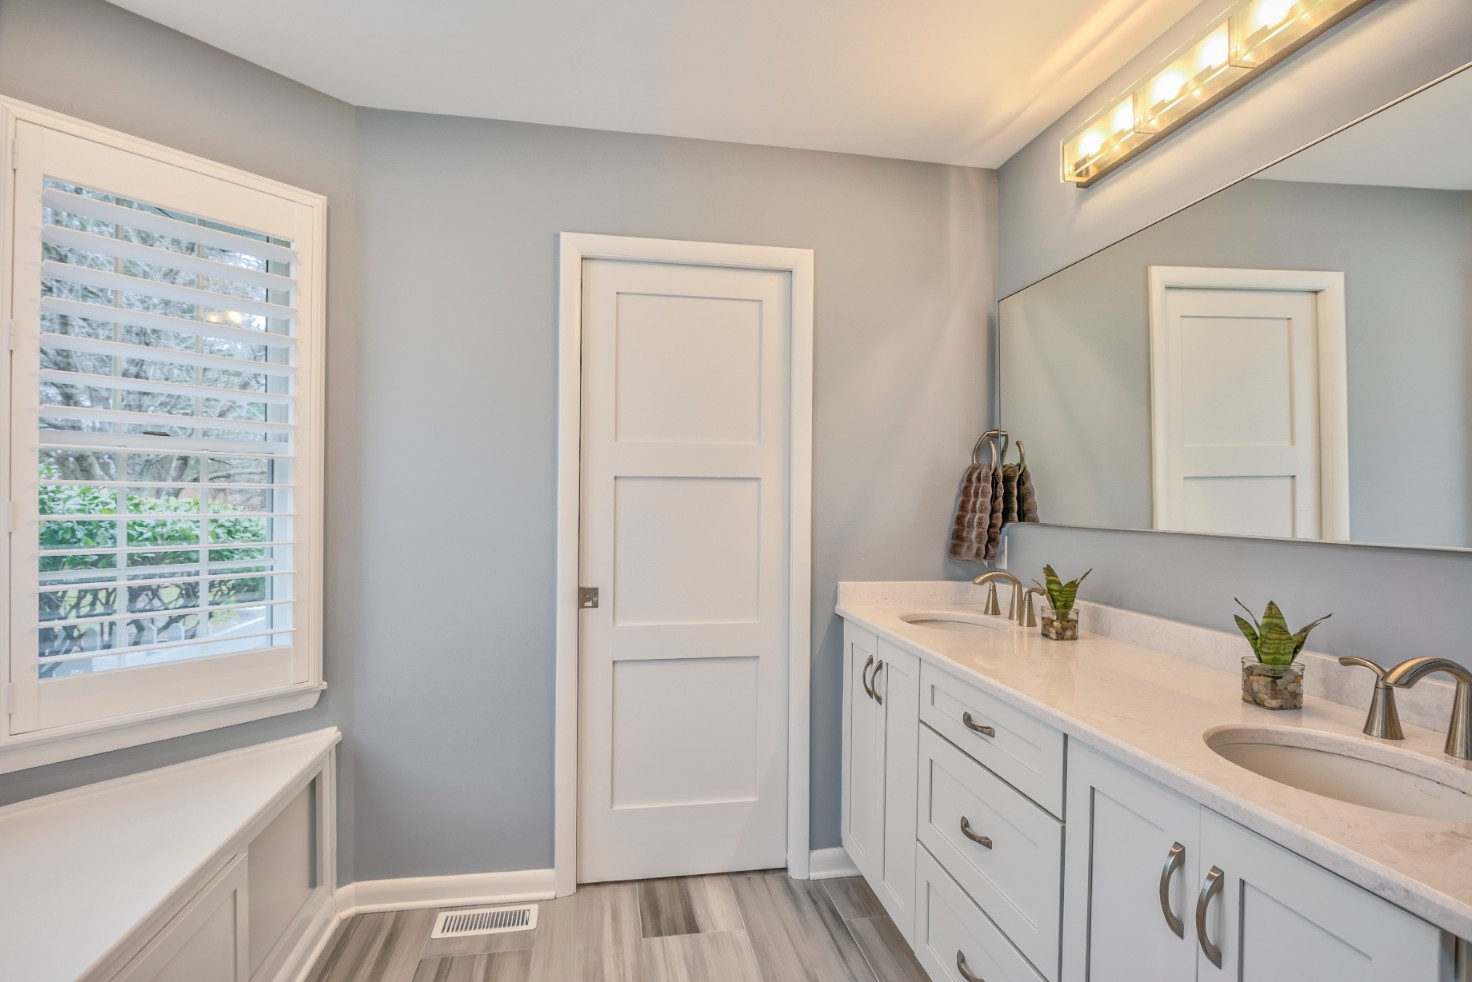 Canal Way Bathroom Remodel in Bethany Beach DE with Large Frameless Mirror